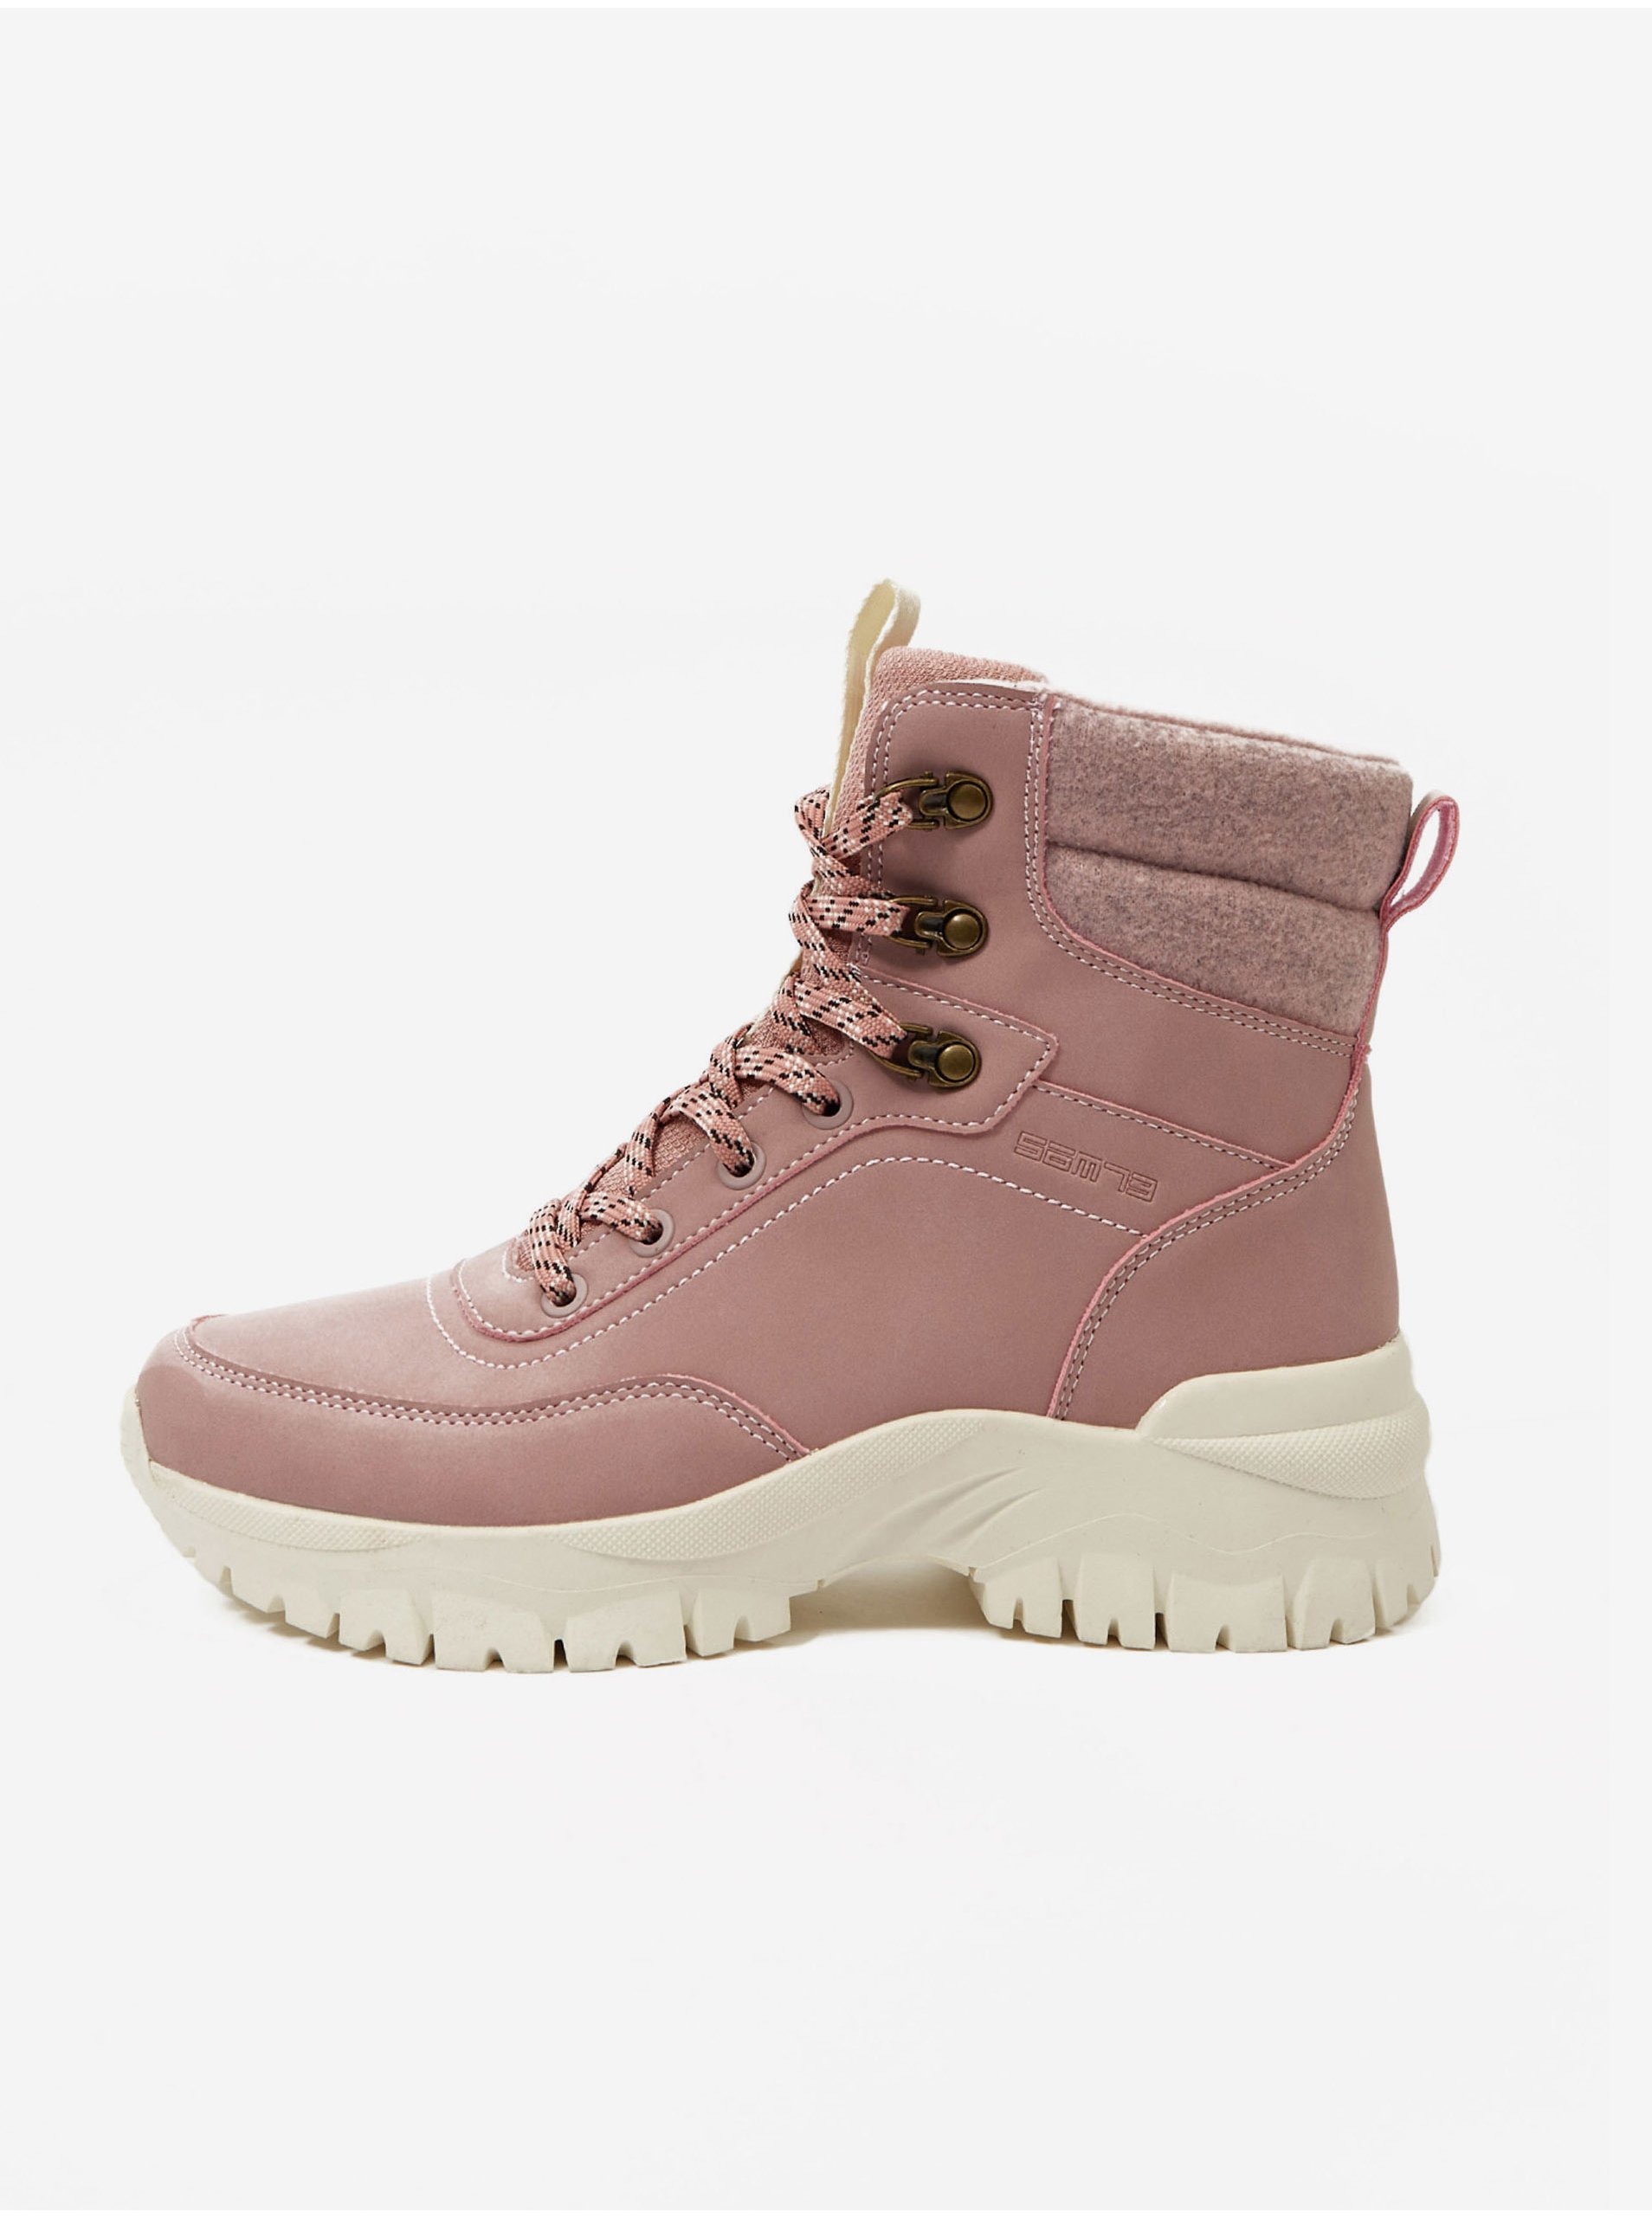 SAM73 Women's Pink Winter Ankle Boots SAM 73 Andaliion - Women